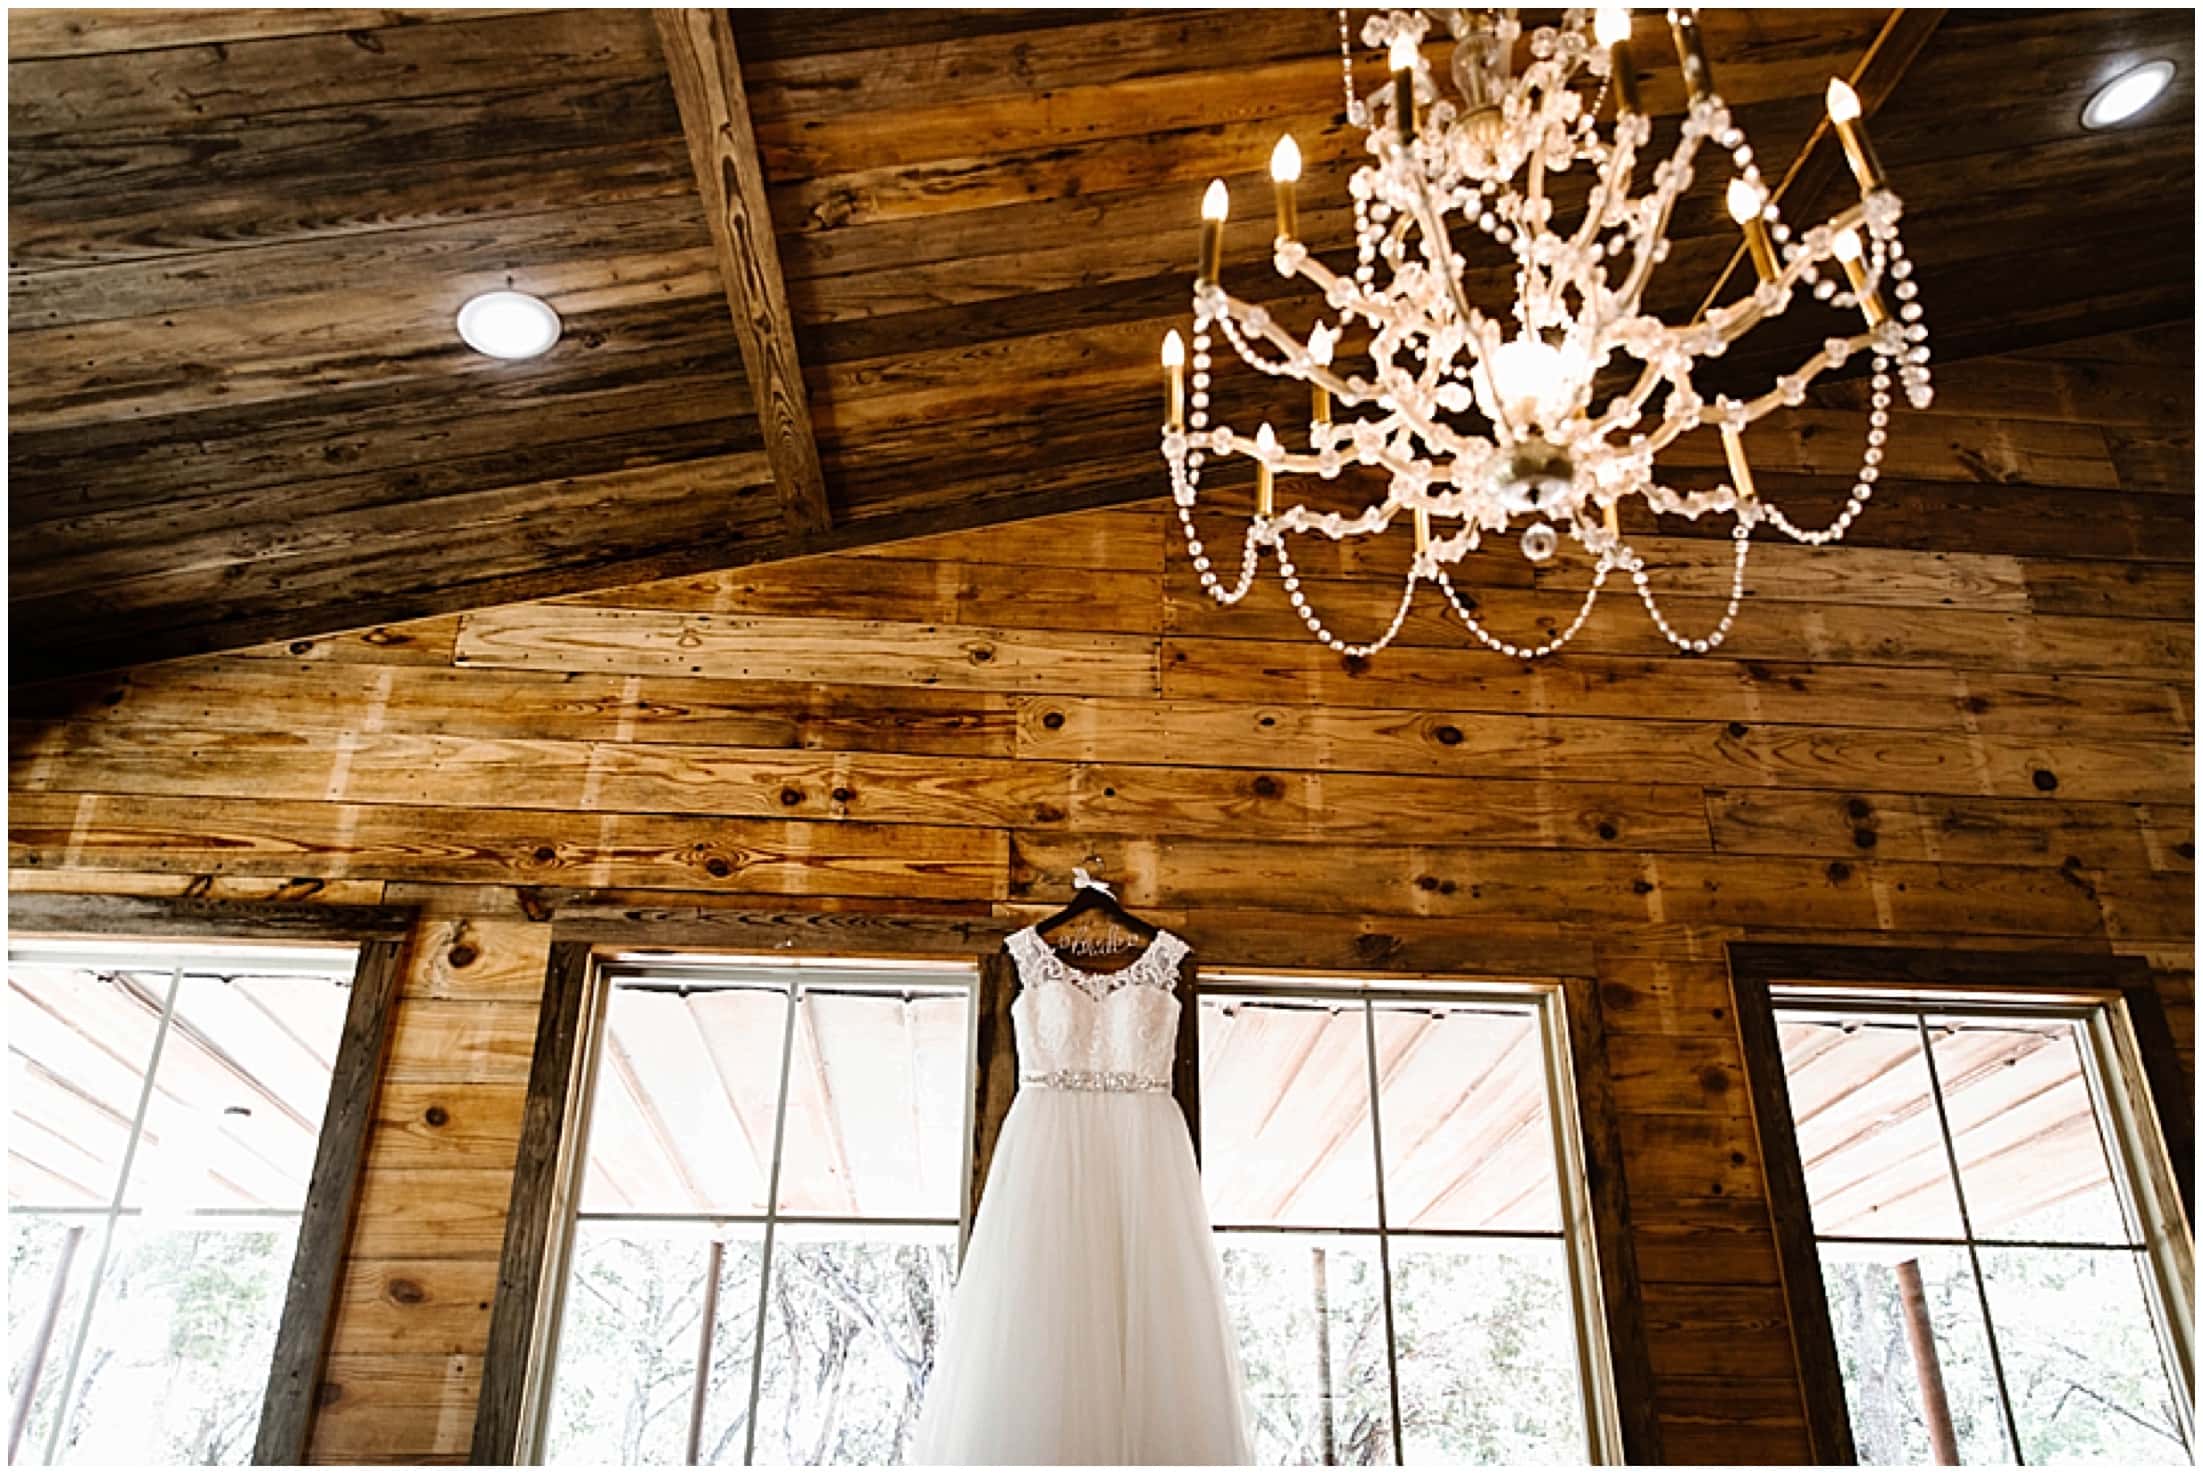 country wedding dress hanging from wall, Brit Nicole Photography, West Texas Barn Wedding, West Texas Small Wedding, West Texas wedding venue, DJ Platinum, Vera Wang engagement ring, Zales Manly Bands wedding ring, David's Bridal wedding dress, Krazy Cakes brides wedding cake, wedding cupcake, Betsey Johnson wedding high heels, Joy's Downtown Flowers wedding decor, Sparrow Creek Ranch, texas wedding ranch, places to get married in Texas, small intimate wedding, summer wedding, texas sky, bride and groom first look, first look with dad, matching bridesmaids robes, June wedding, junebug weddings, wandering weddings, the knot, best weddings